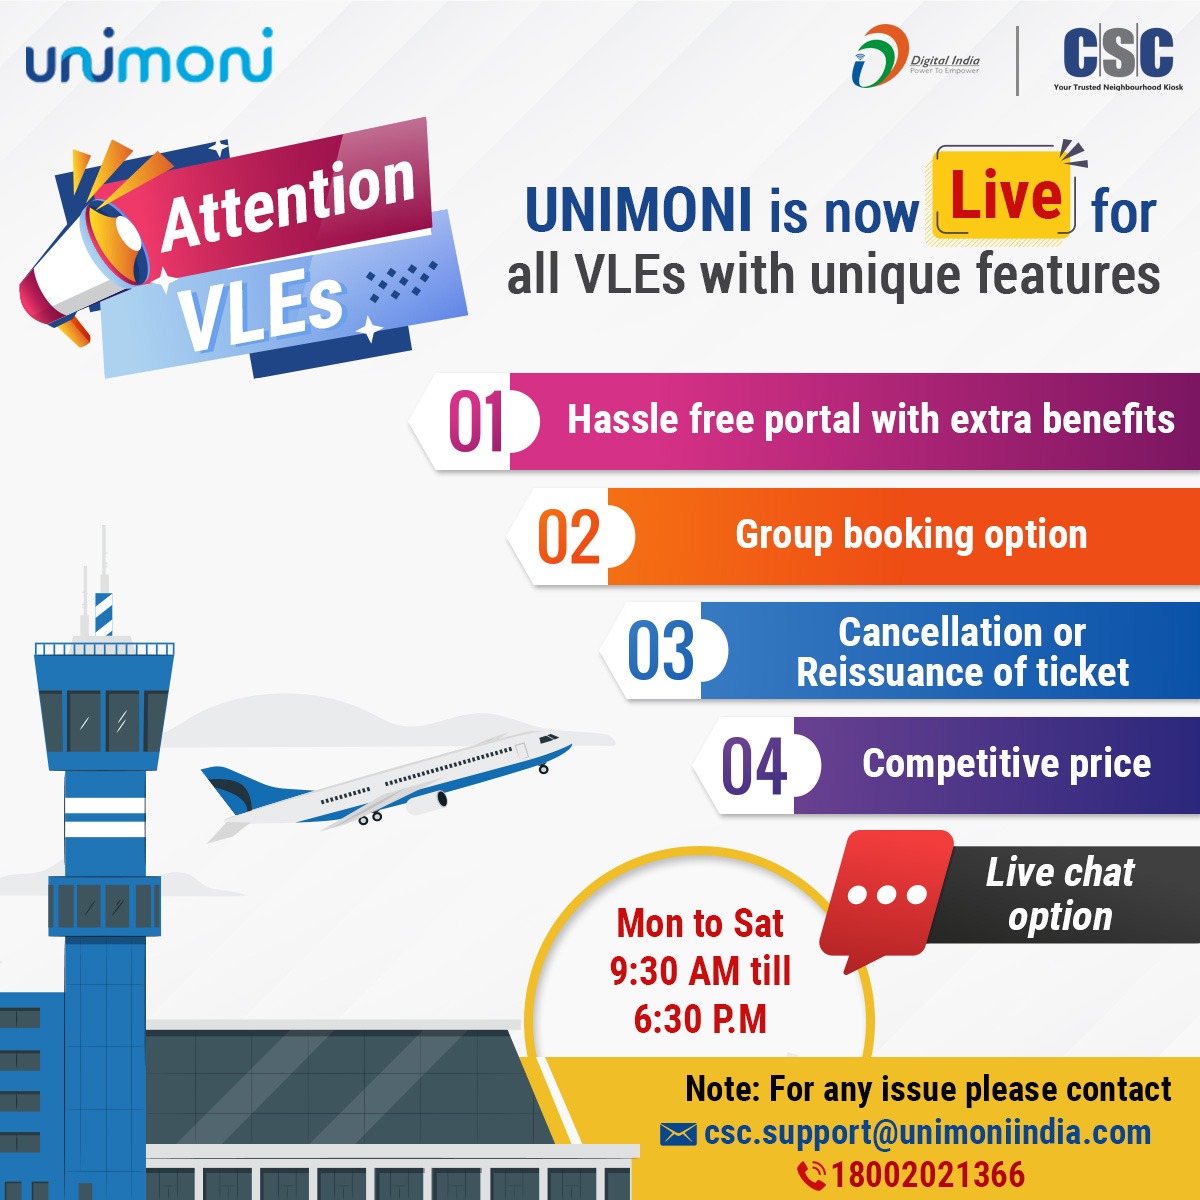 Attention!!  

Unimoni is now LIVE for all VLEs with unique features.  To book flight tickets, 

please login at cscsafar.in.   

#cscsafar #csc #digitalindia #cscflightbooking #airservices #flighttickets #unimoni